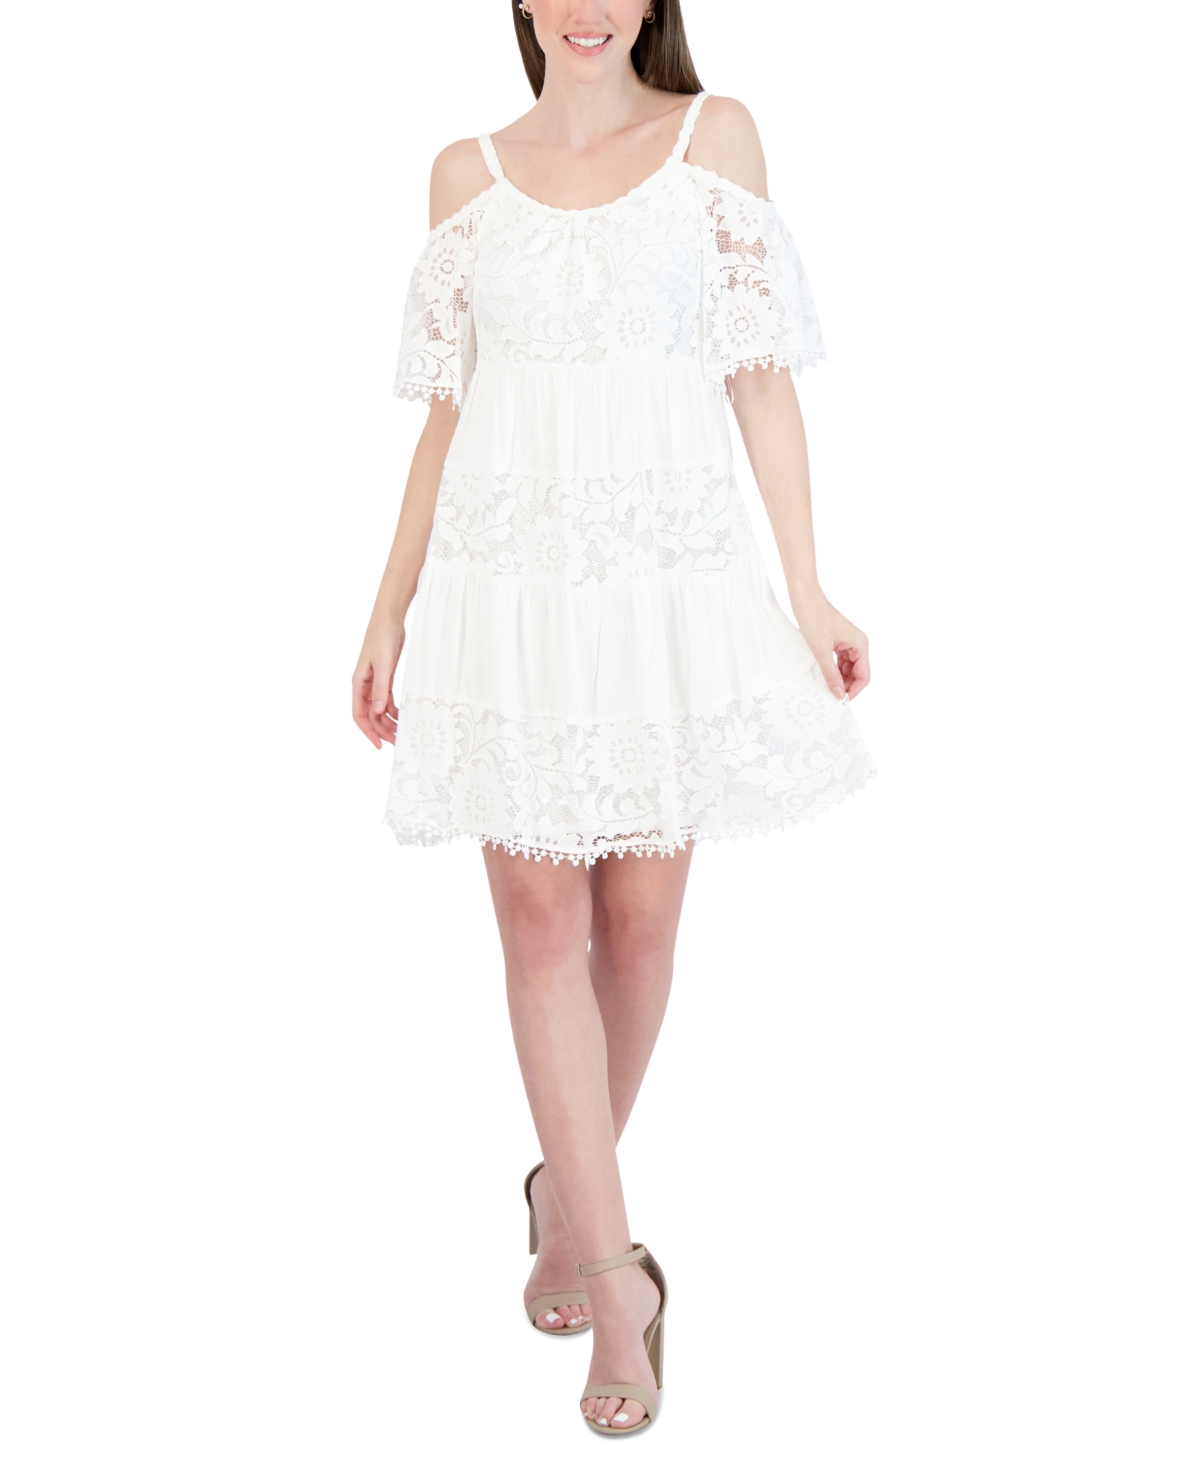 Women's Lace Off-The-Shoulder Dress - Ivory